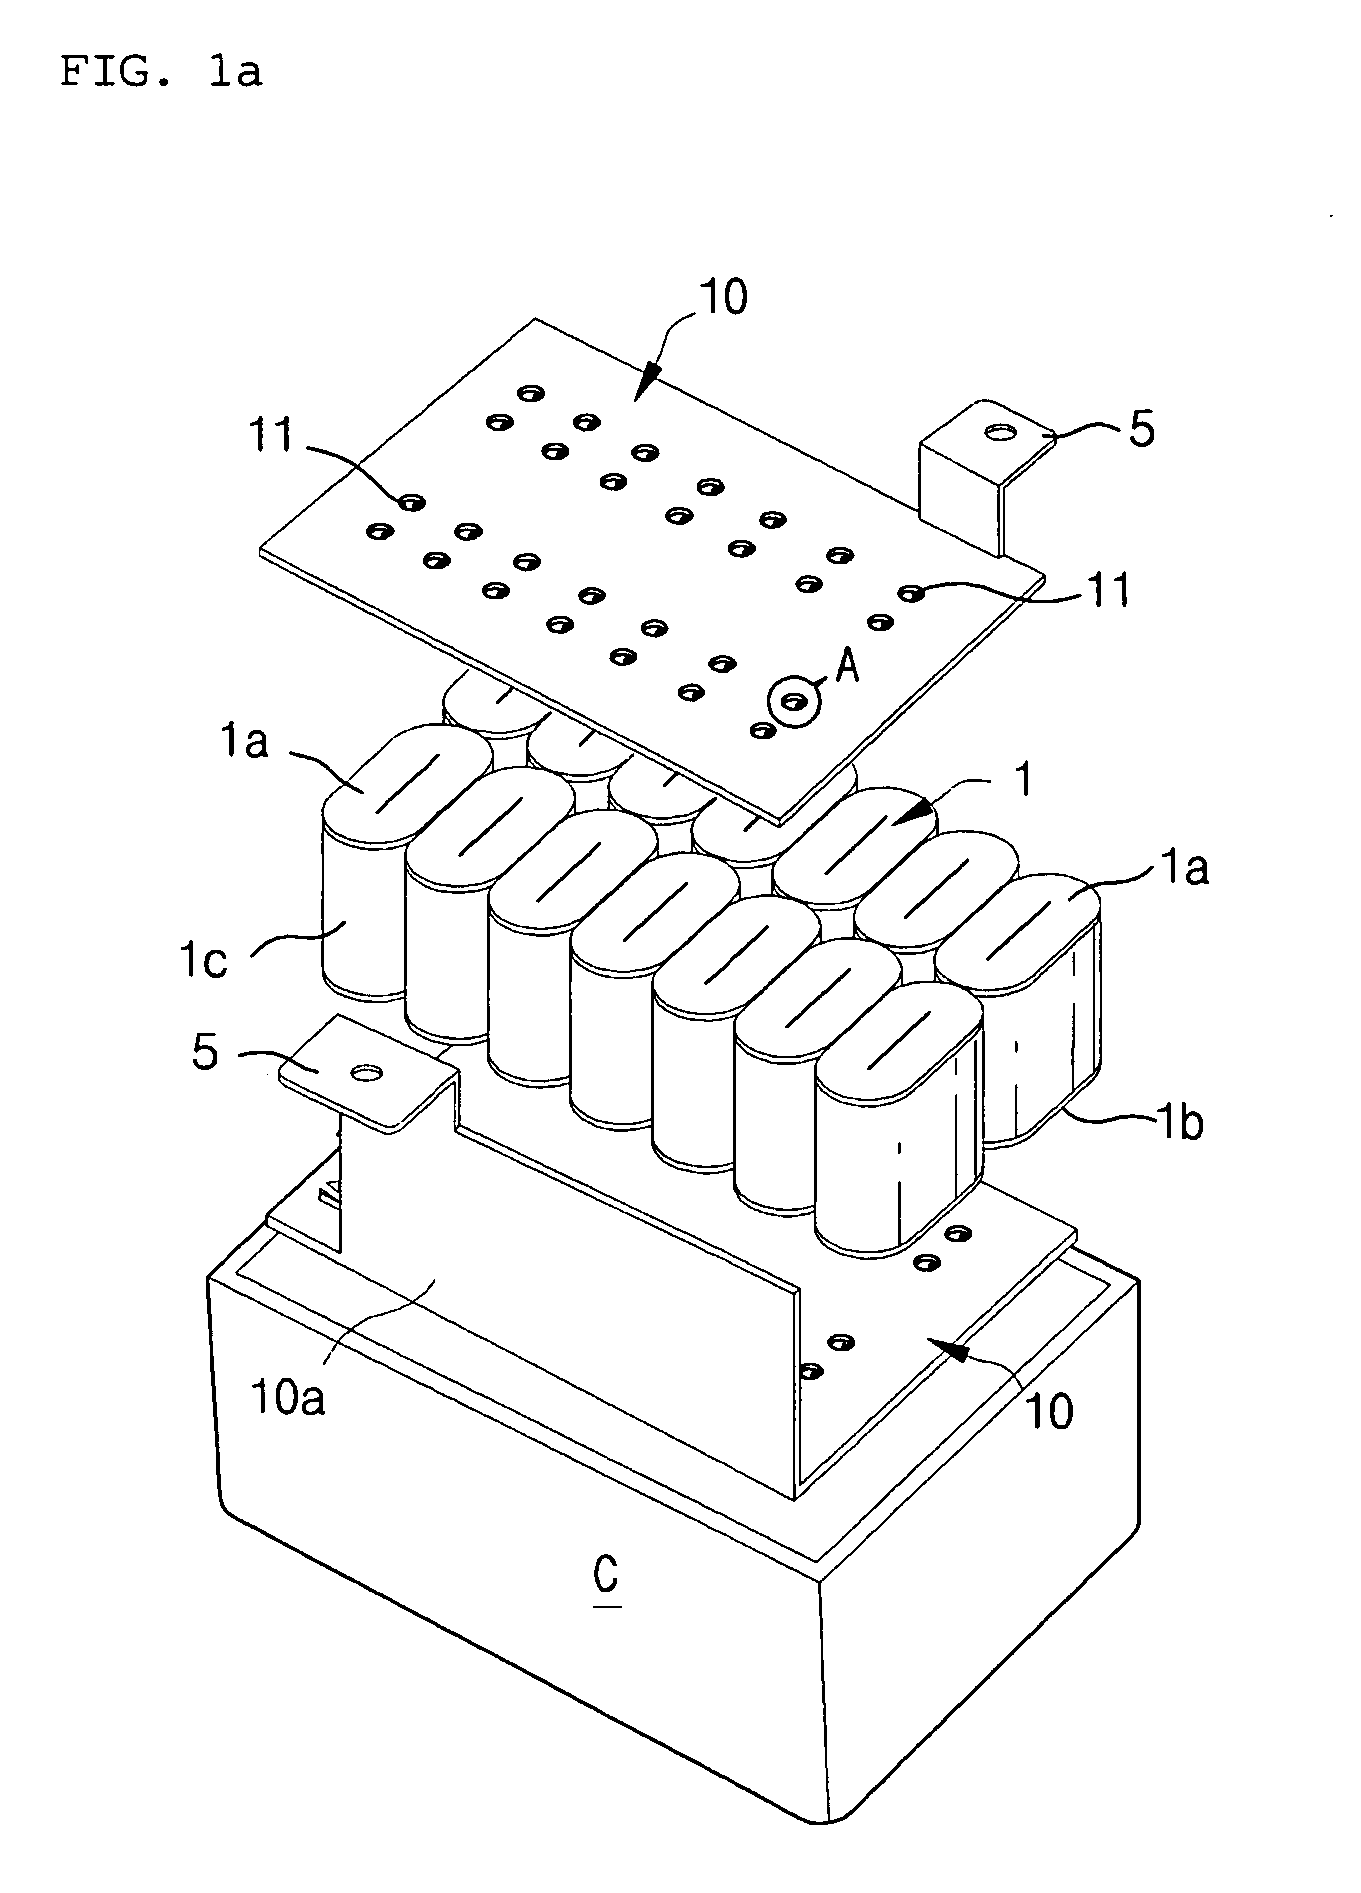 Bus-bar for jointing capacitor